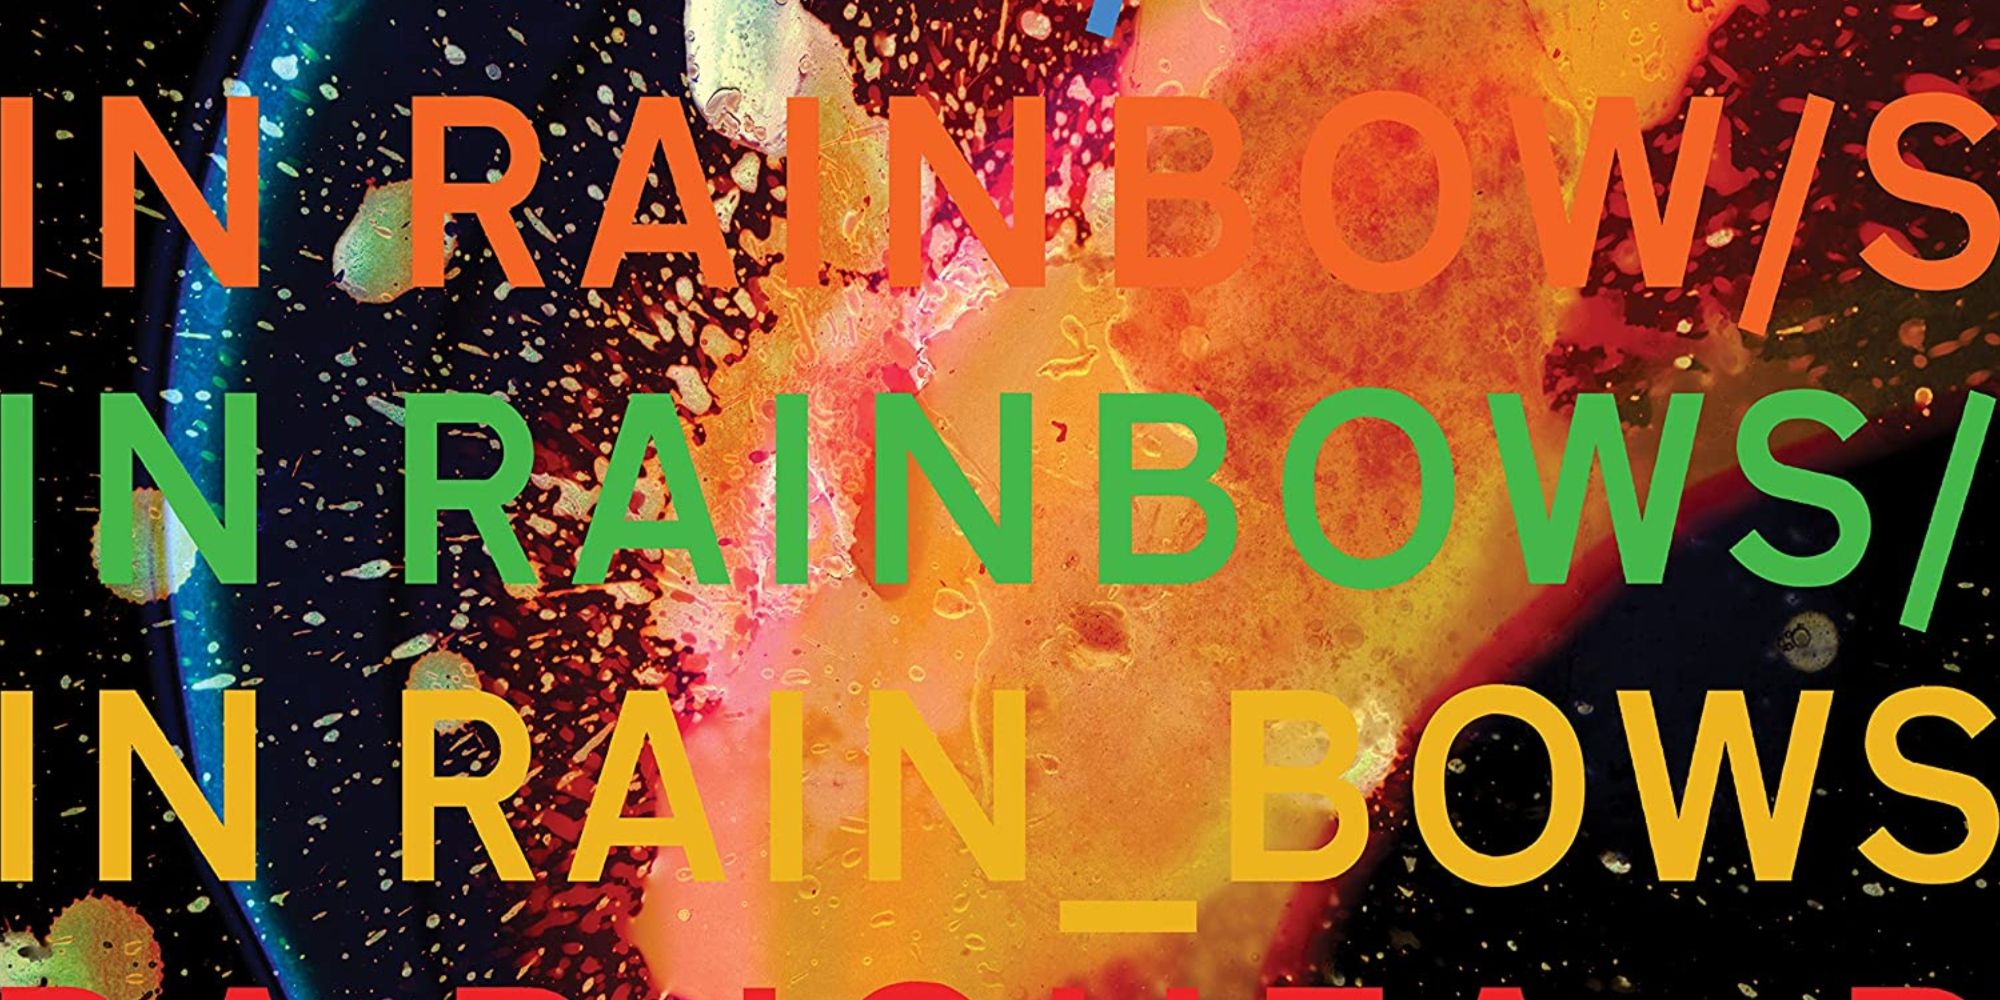 In Rainbows cover art by Radiohead.